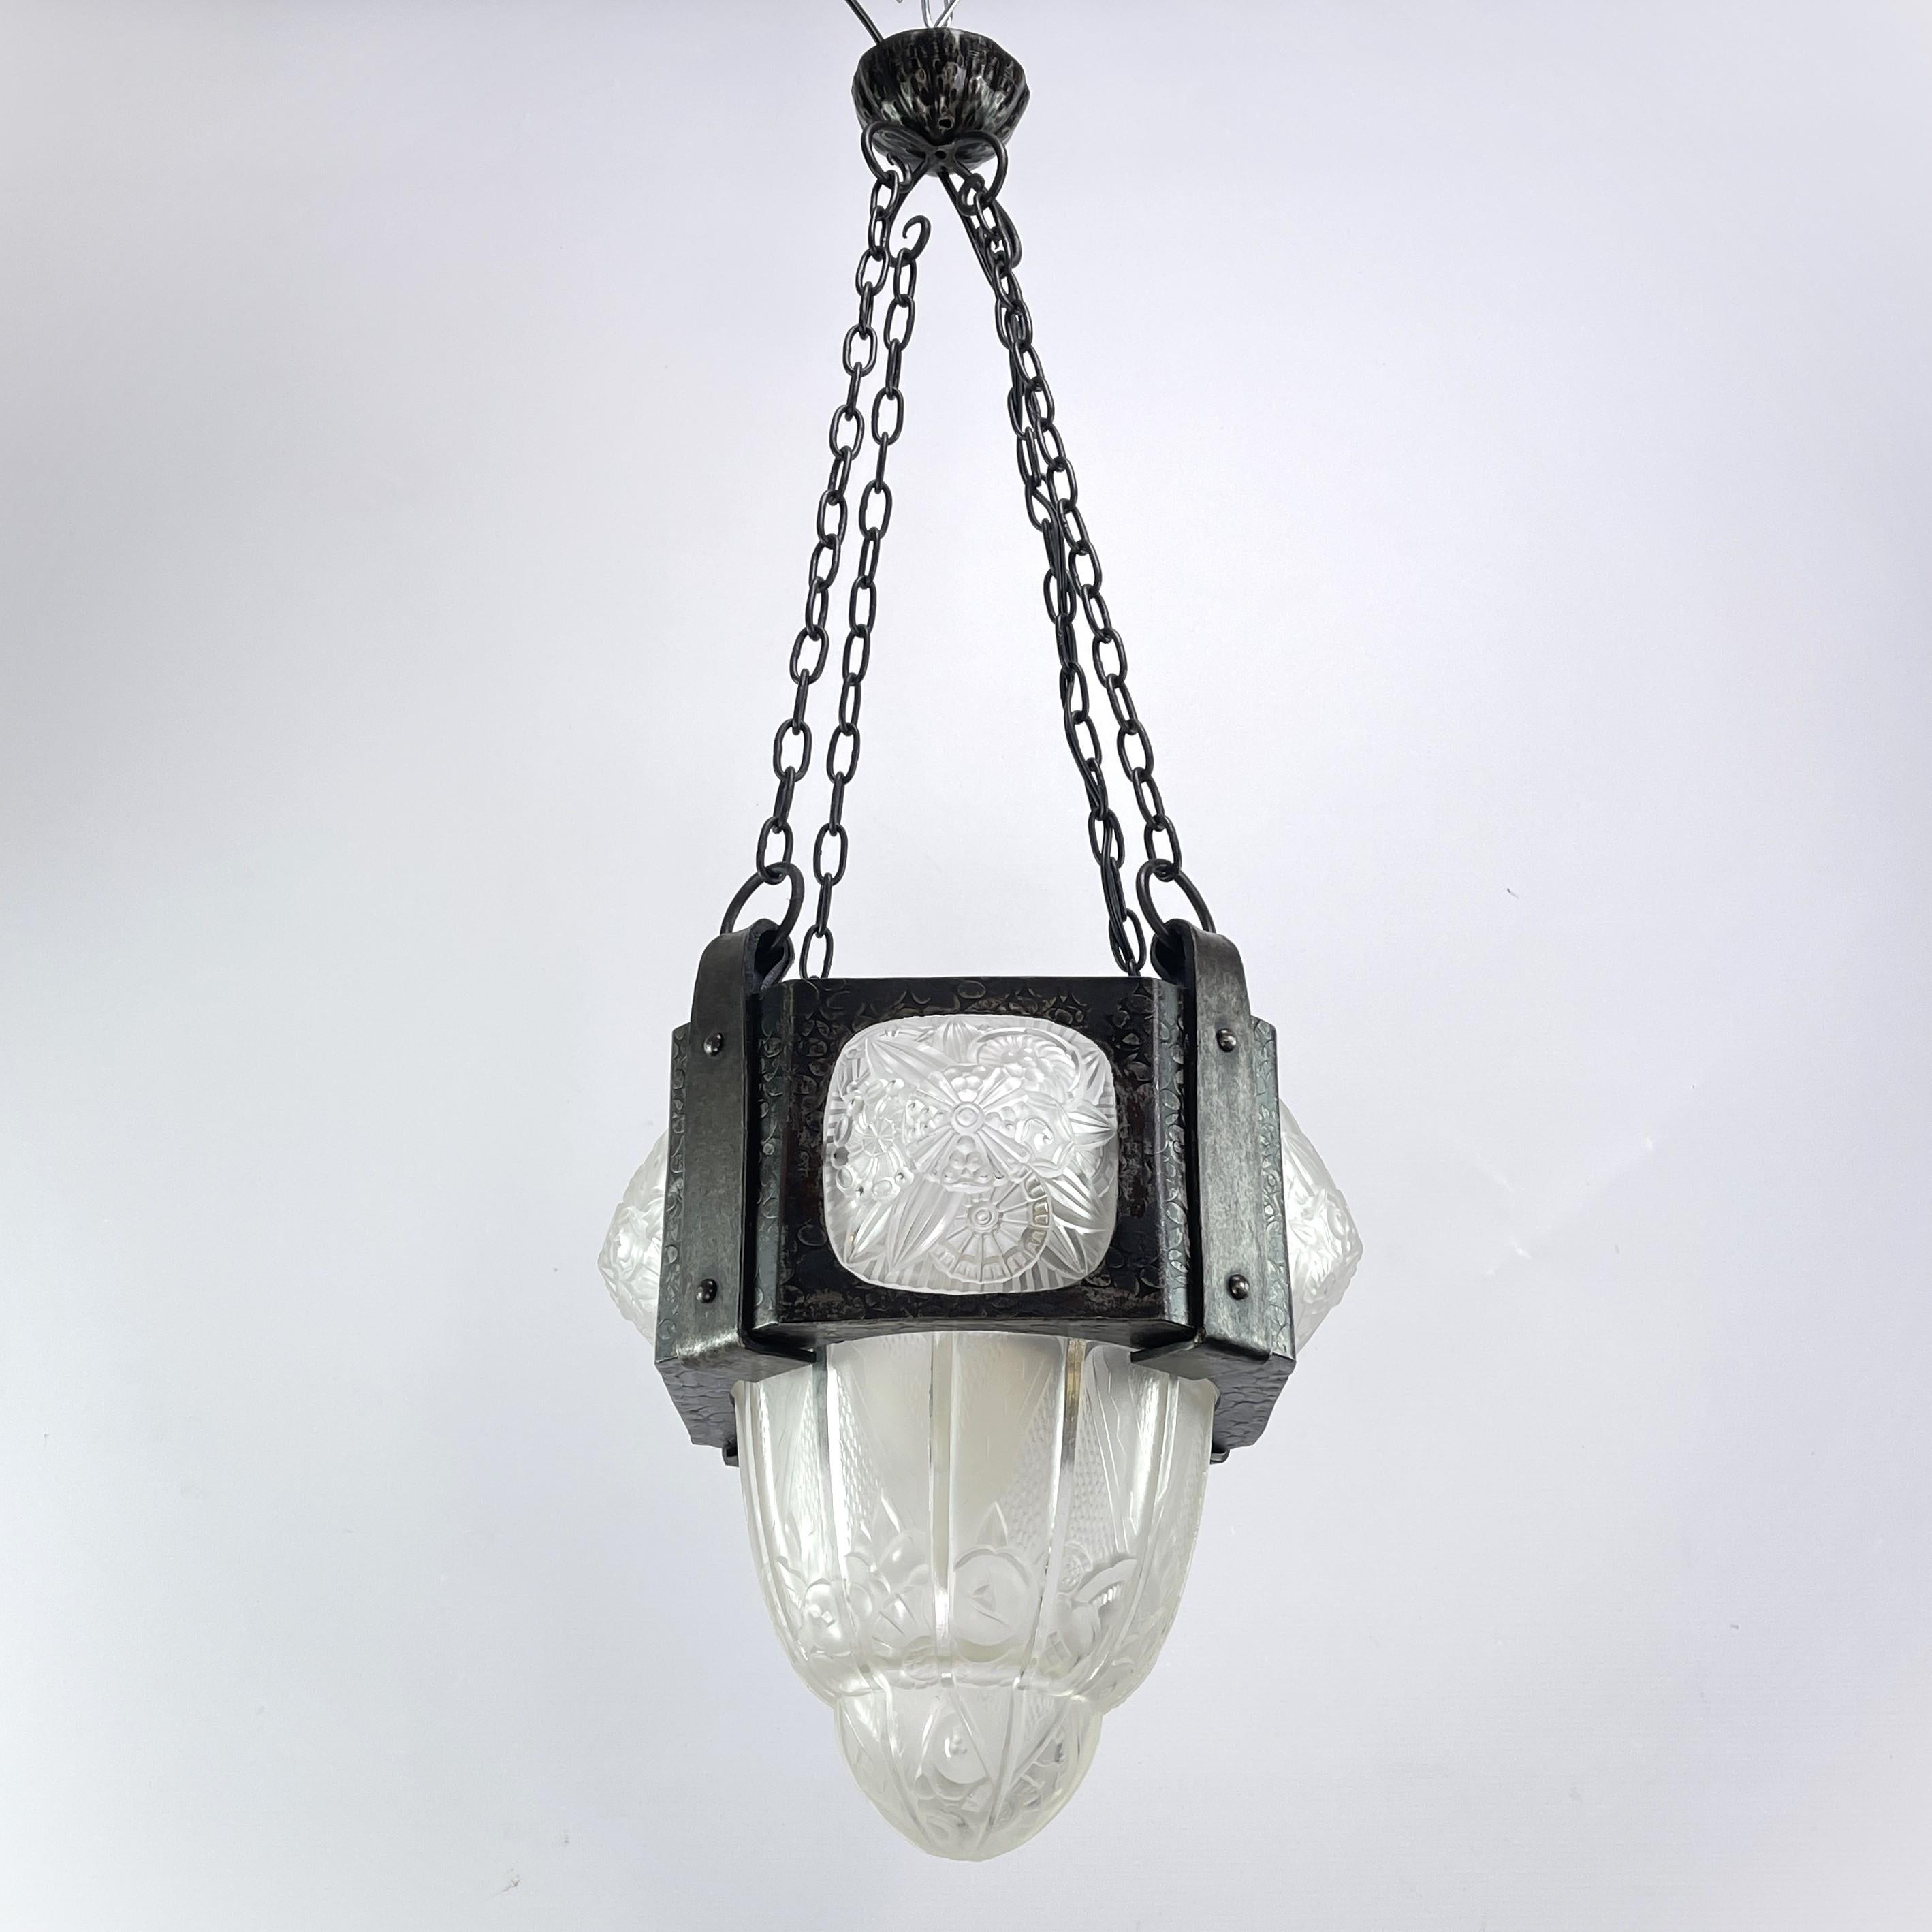 French Art Deco Chandelier by Hettier & Vincent wrought iron, 1930s For Sale